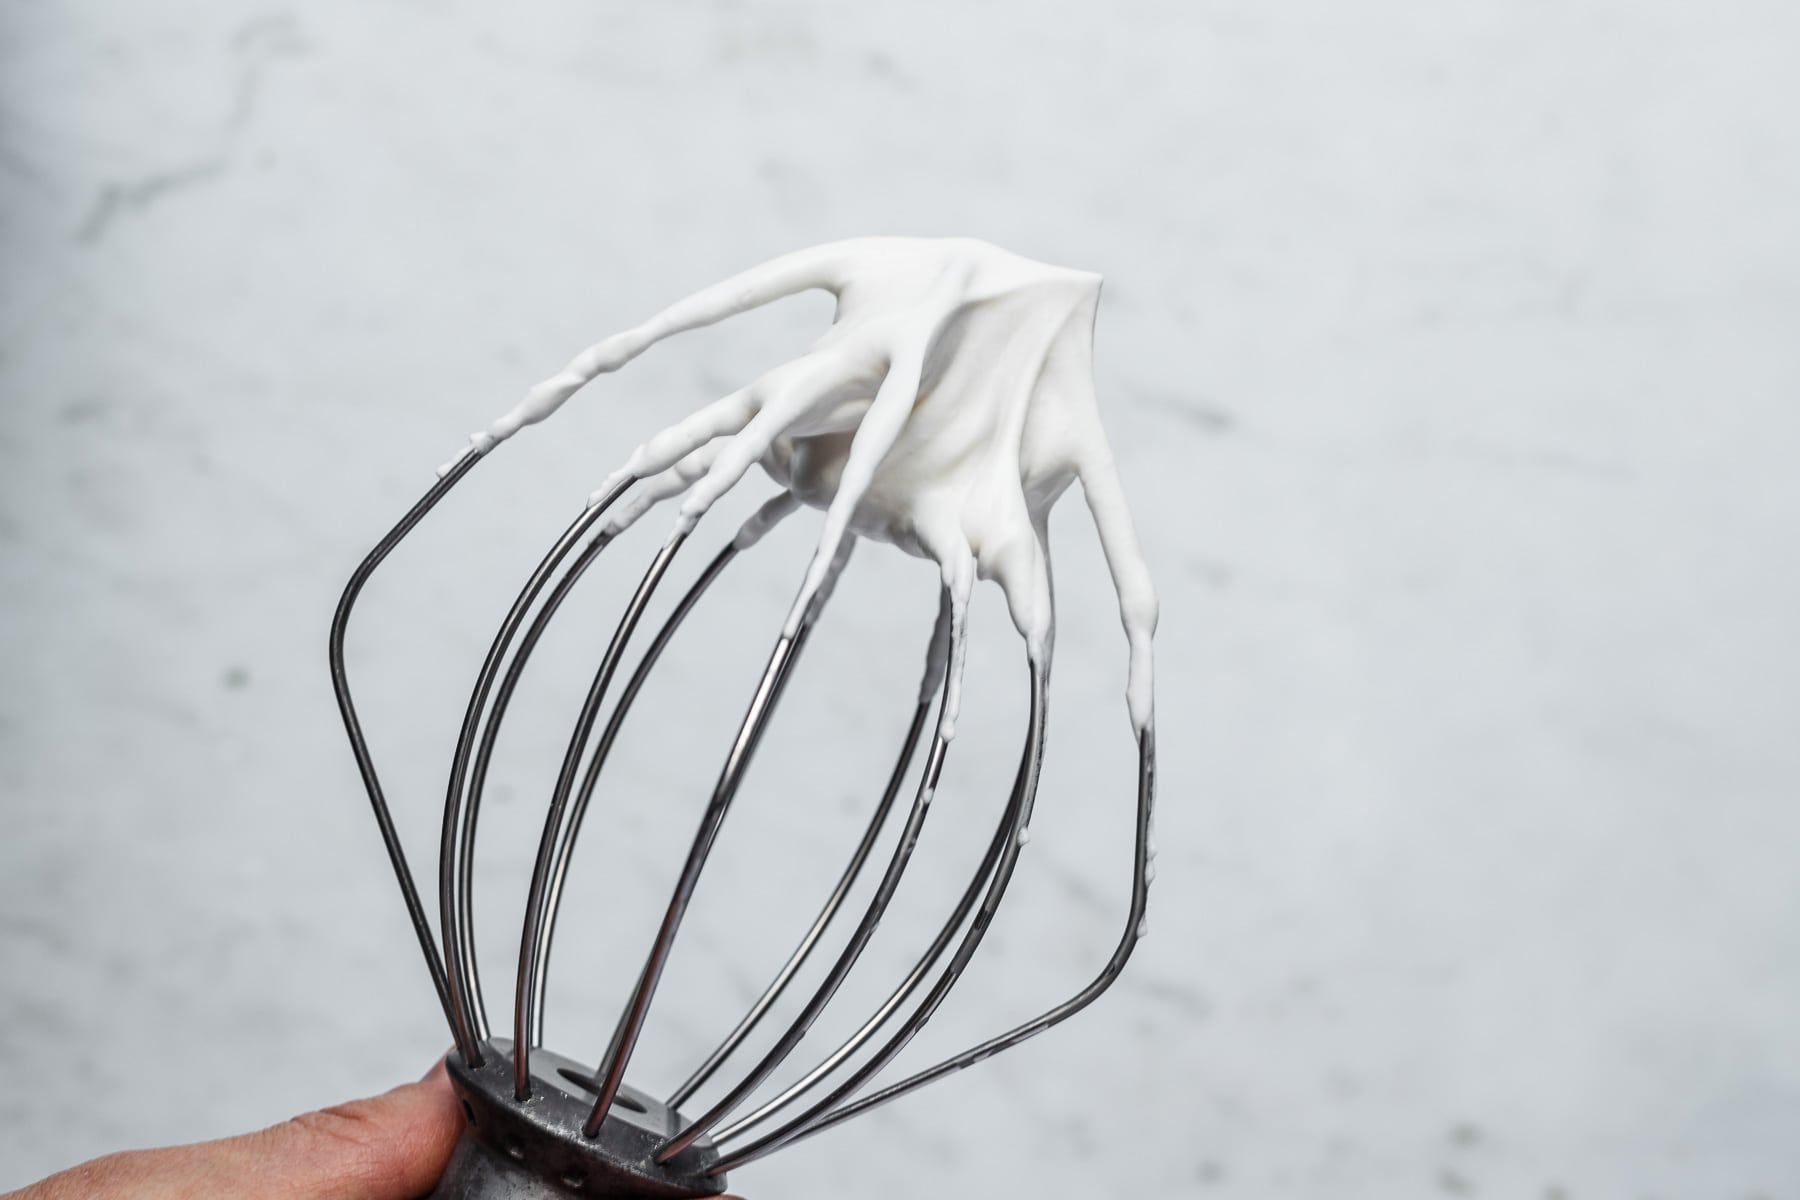 A process photo showing the wire whisk from a stand mixer holding whipped cream beaten to soft peaks.